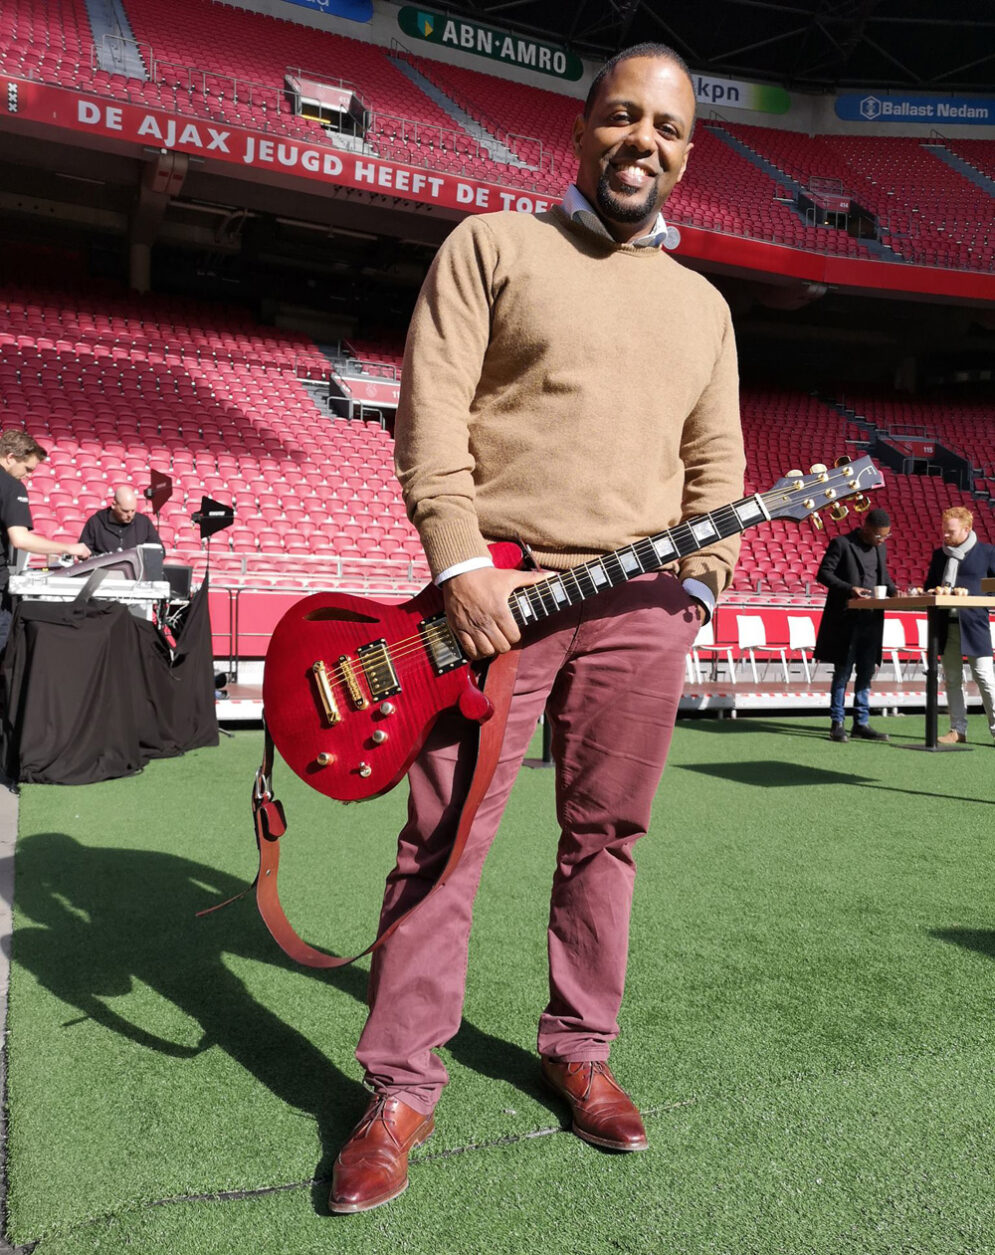 Orville Breeveld with his red Fern's Guitars Custom electric guitar at the Ajax football stadium in Amsterdam.